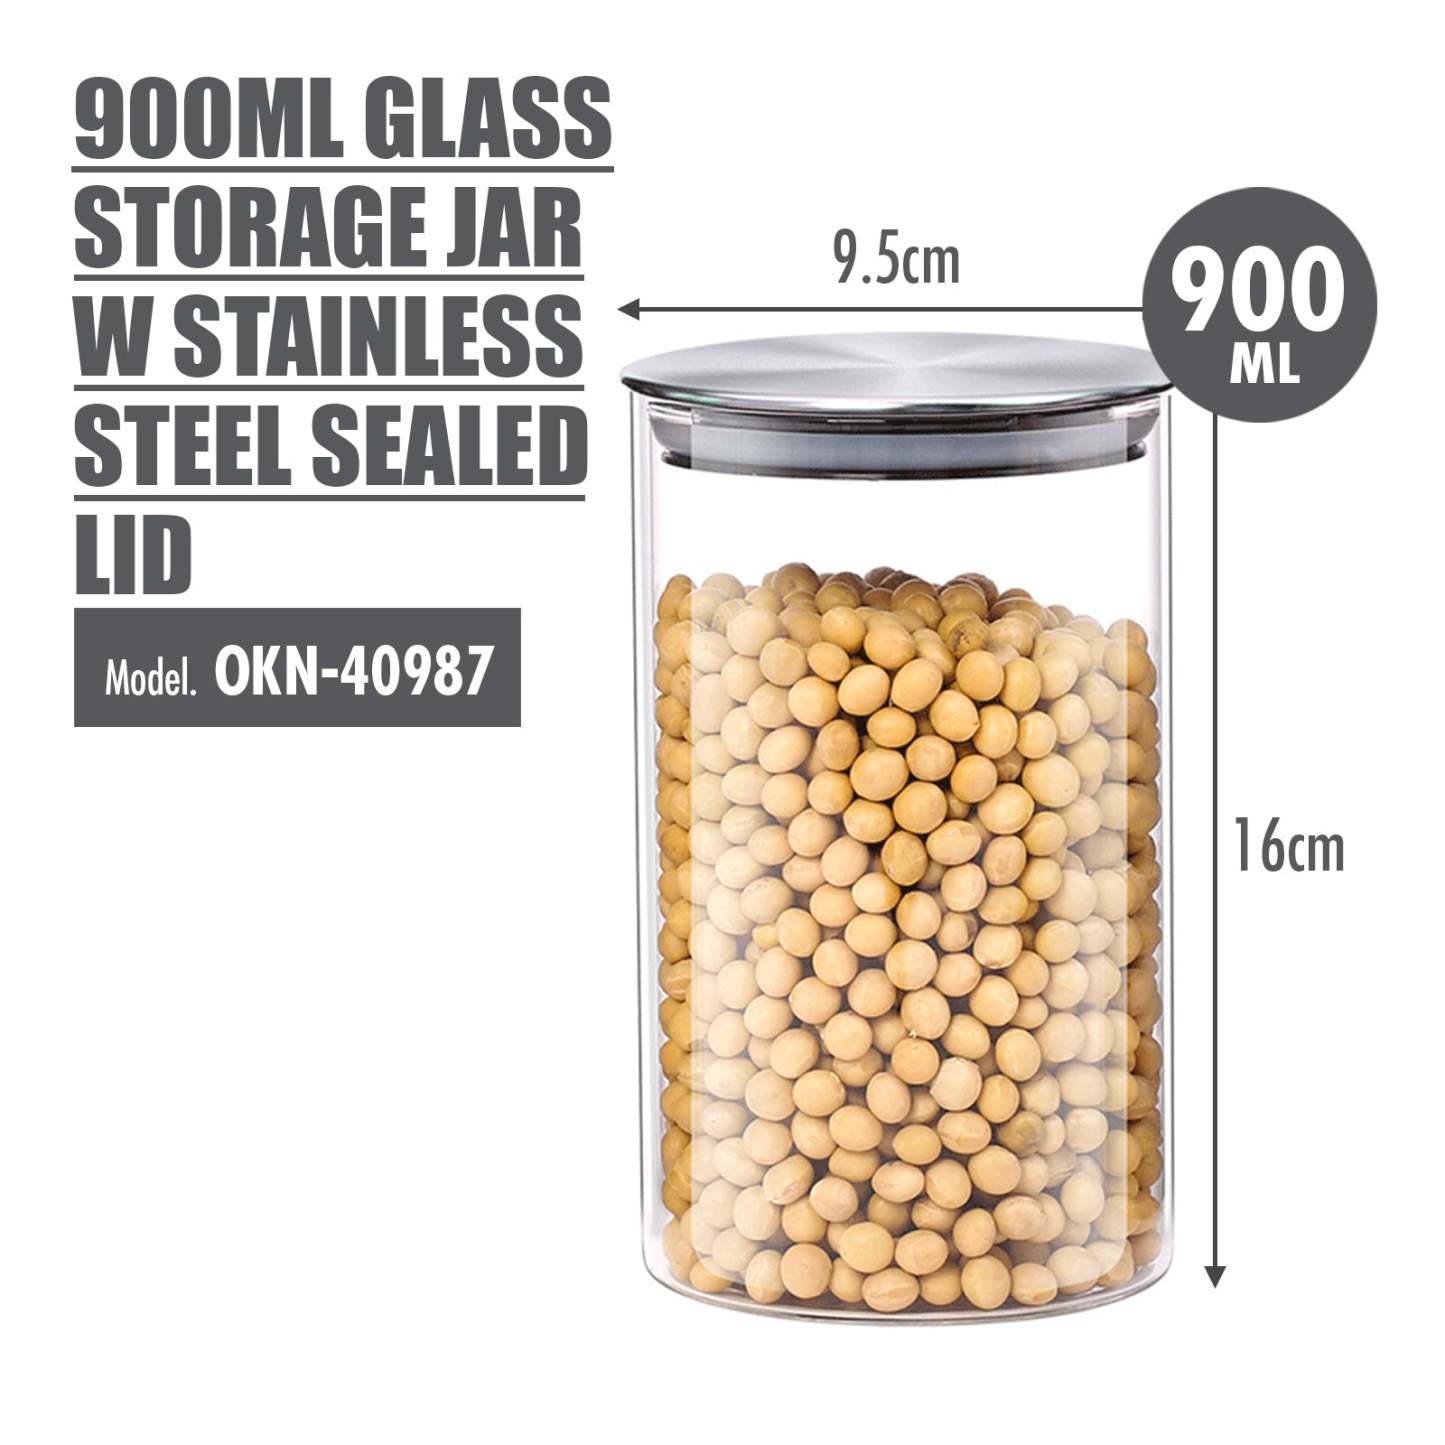 900ml Glass Storage Jar with Stainless Steel Sealed Lid (Dia: 9.5cm) - HOUZE - The Homeware Superstore